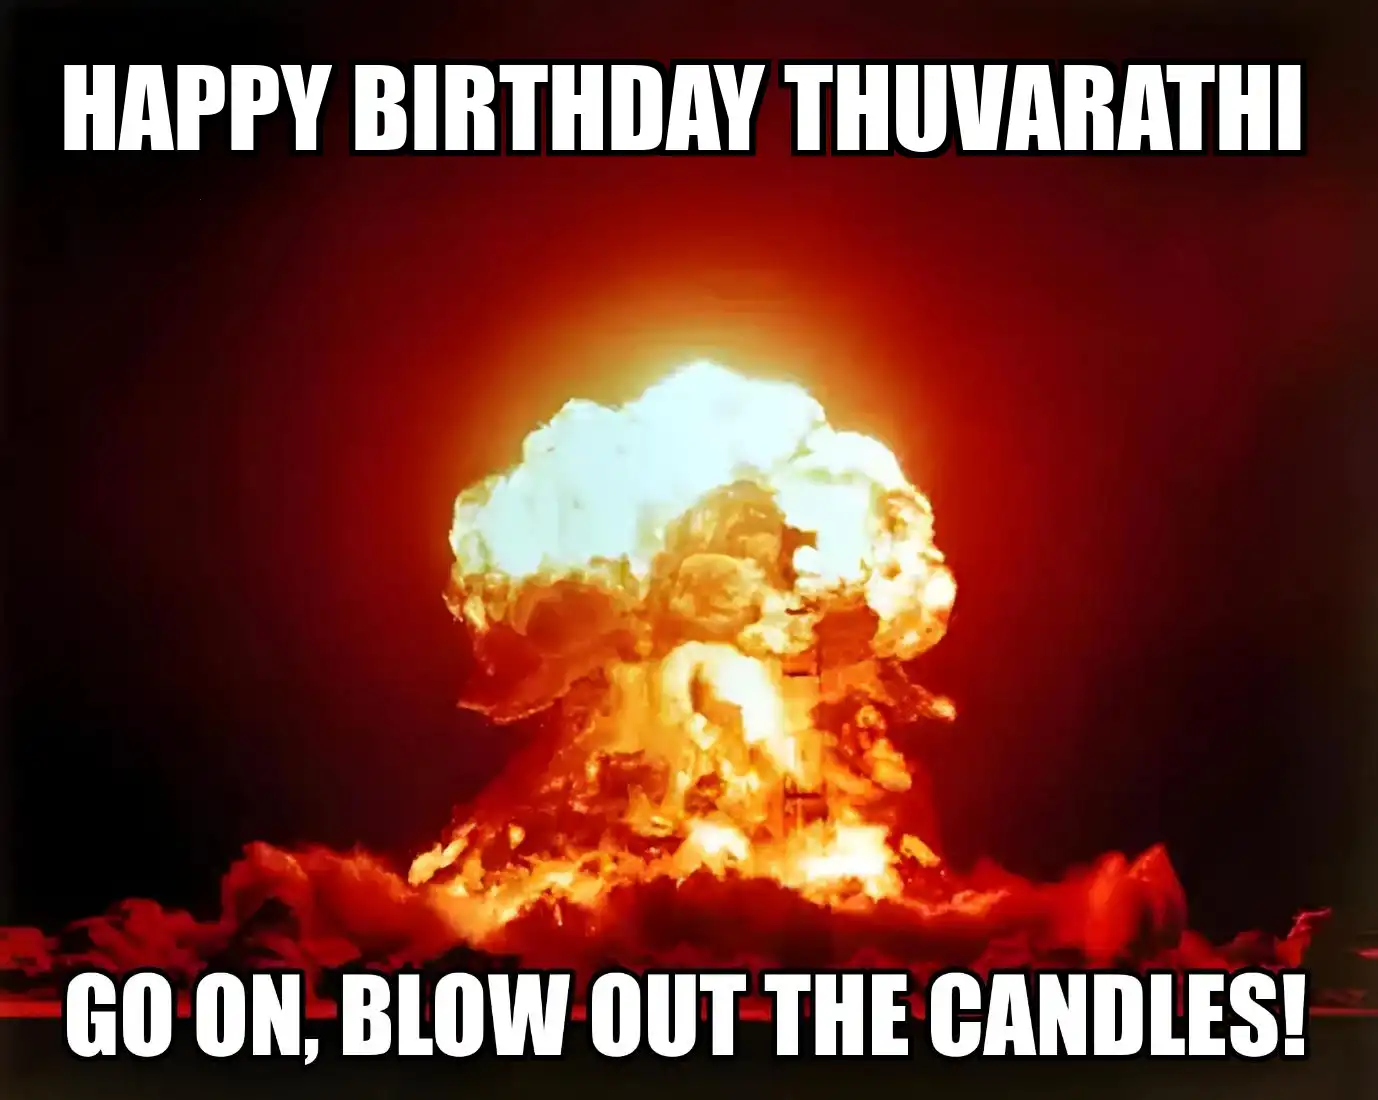 Happy Birthday Thuvarathi Go On Blow Out The Candles Meme